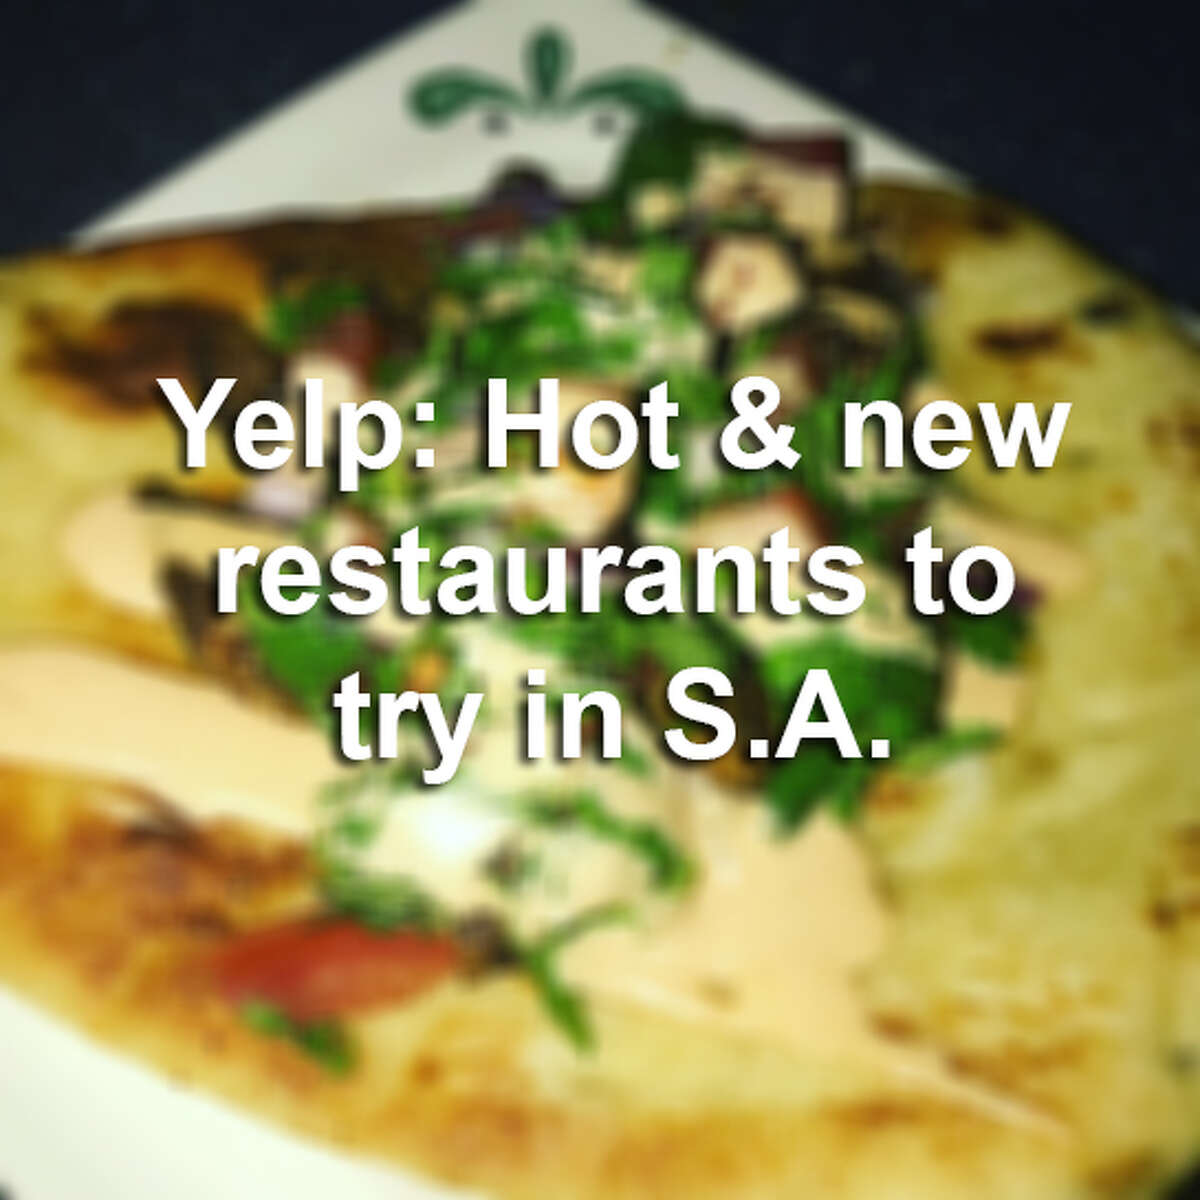 Click ahead to find out the best restaurants to try this summer in San Antonio, according to Yelp users.